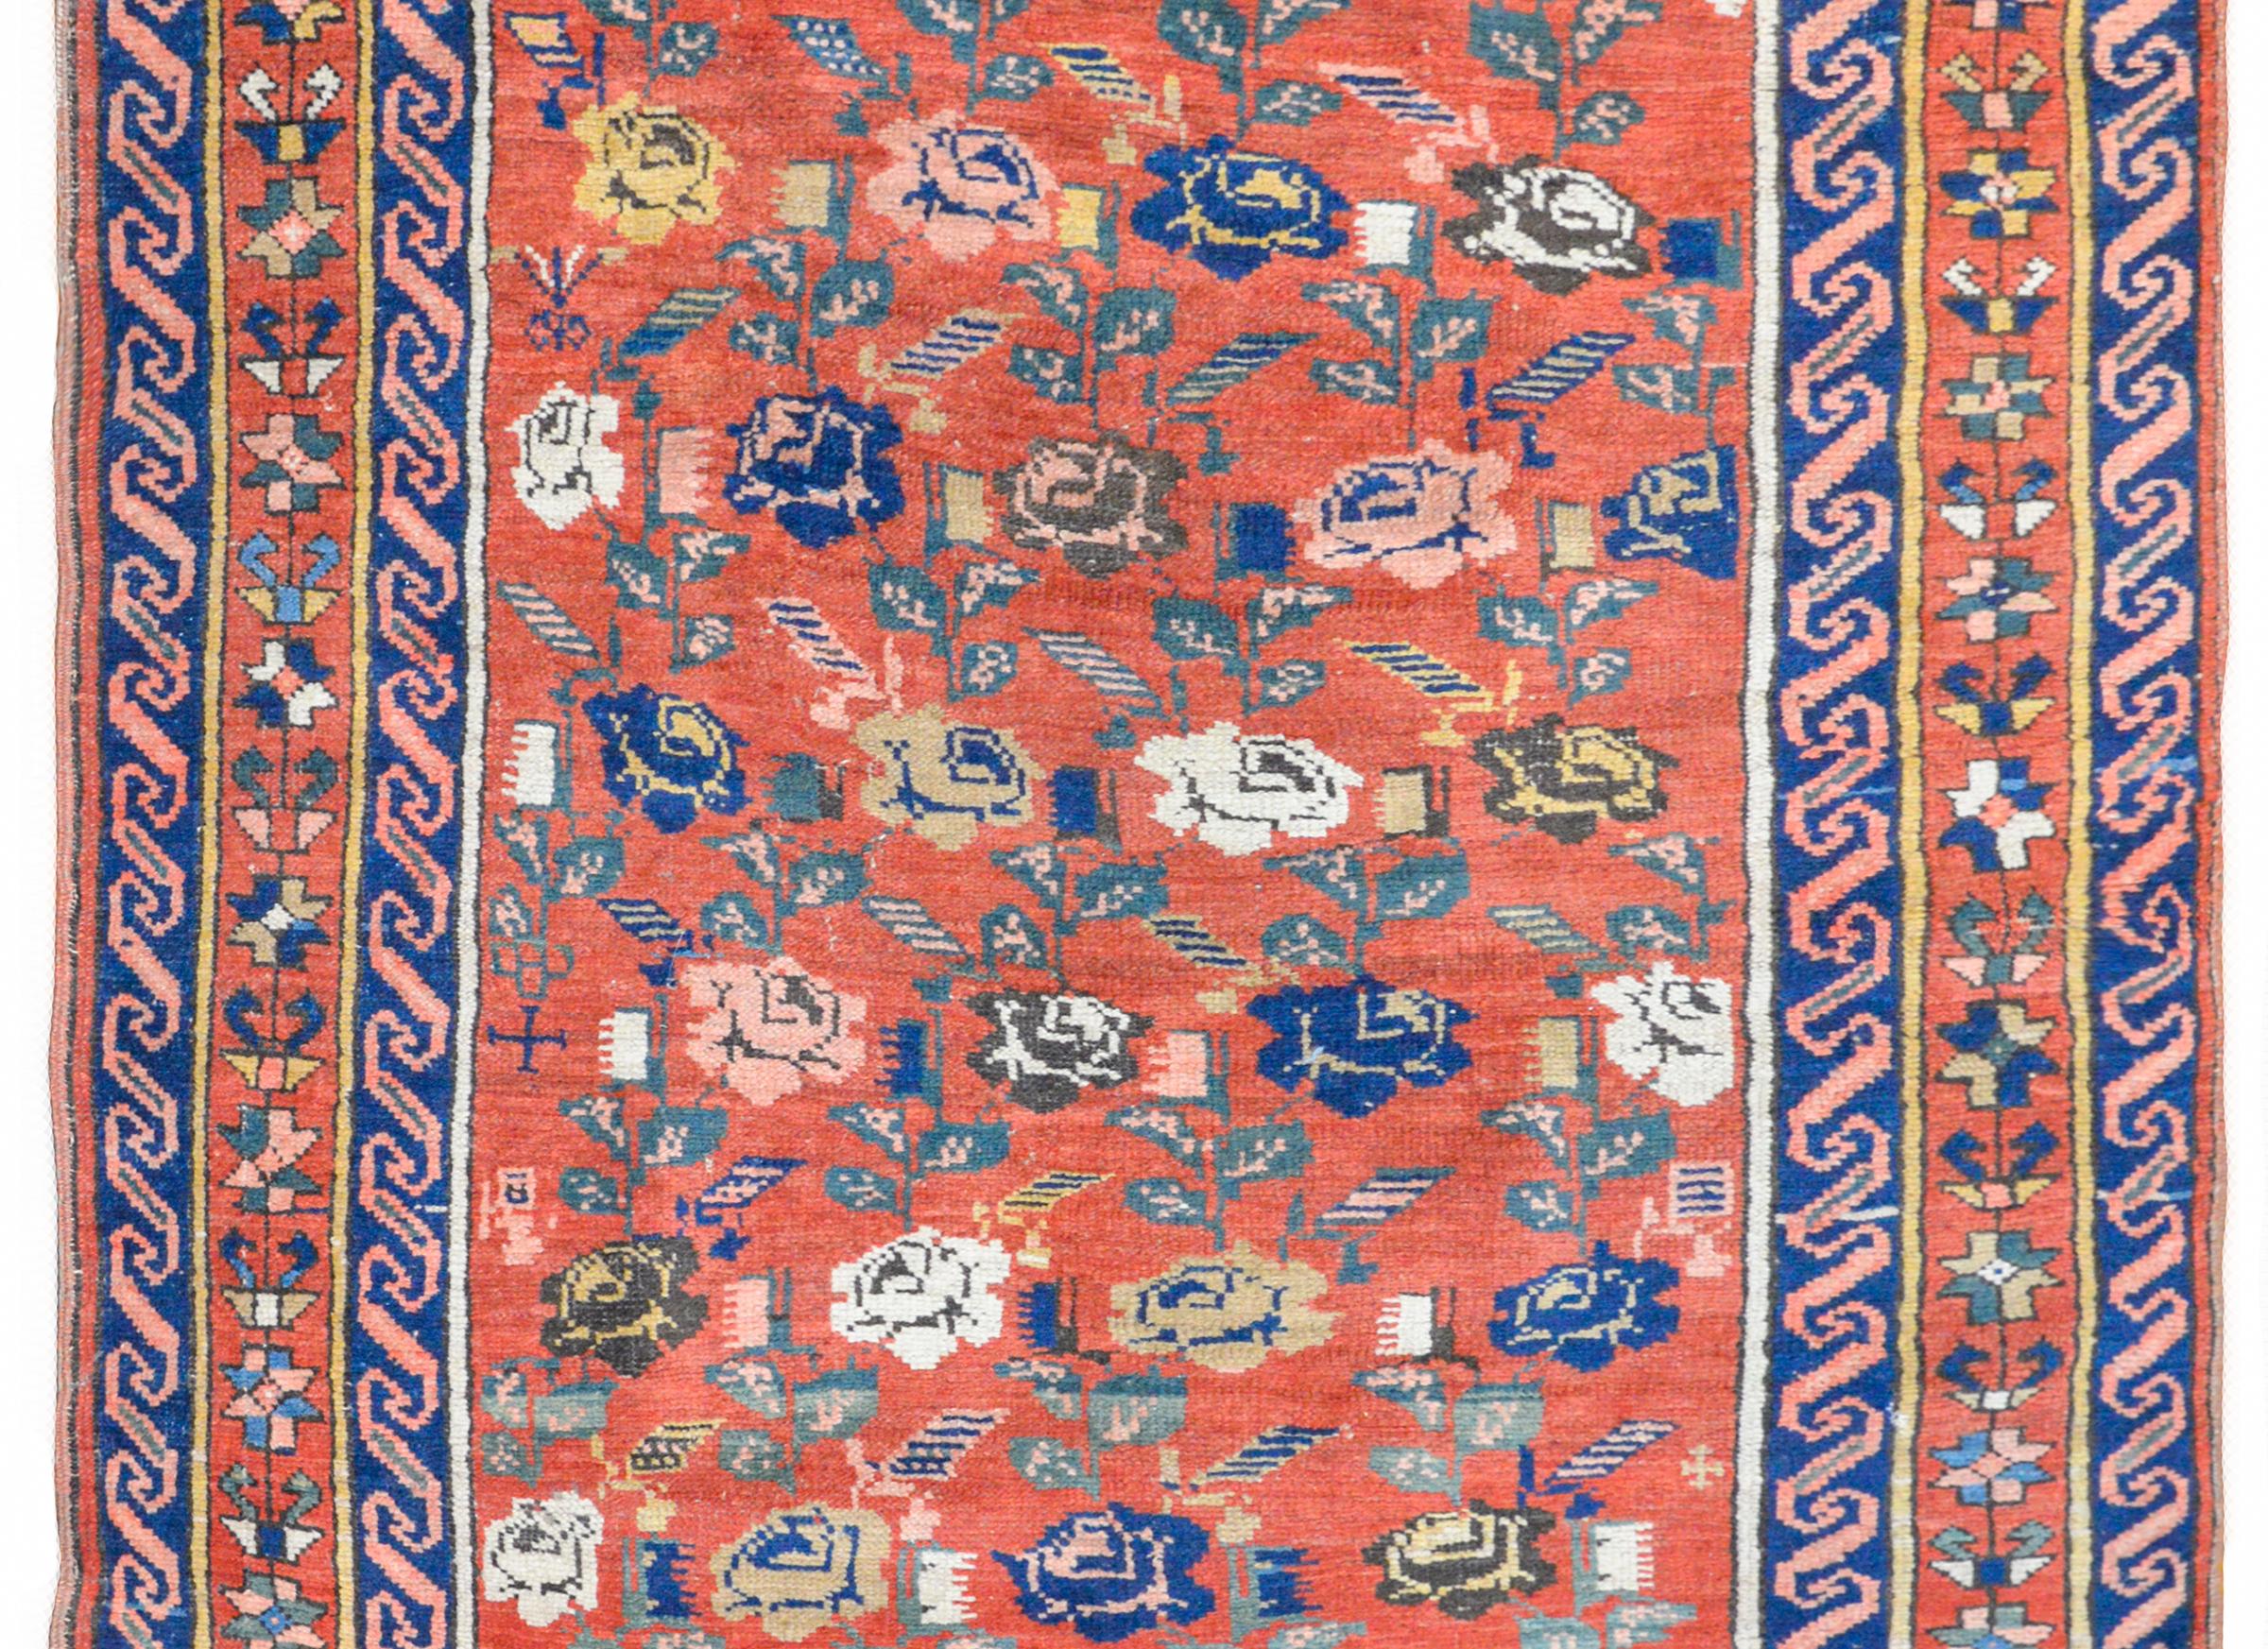 An extraordinary early 20th century Caucasian Karabagh rug with an all-over large scale rose pattern woven in white, brown, indigo, gold, and pink with green leaves, and all against a crimson background. The border is wonderful with a central